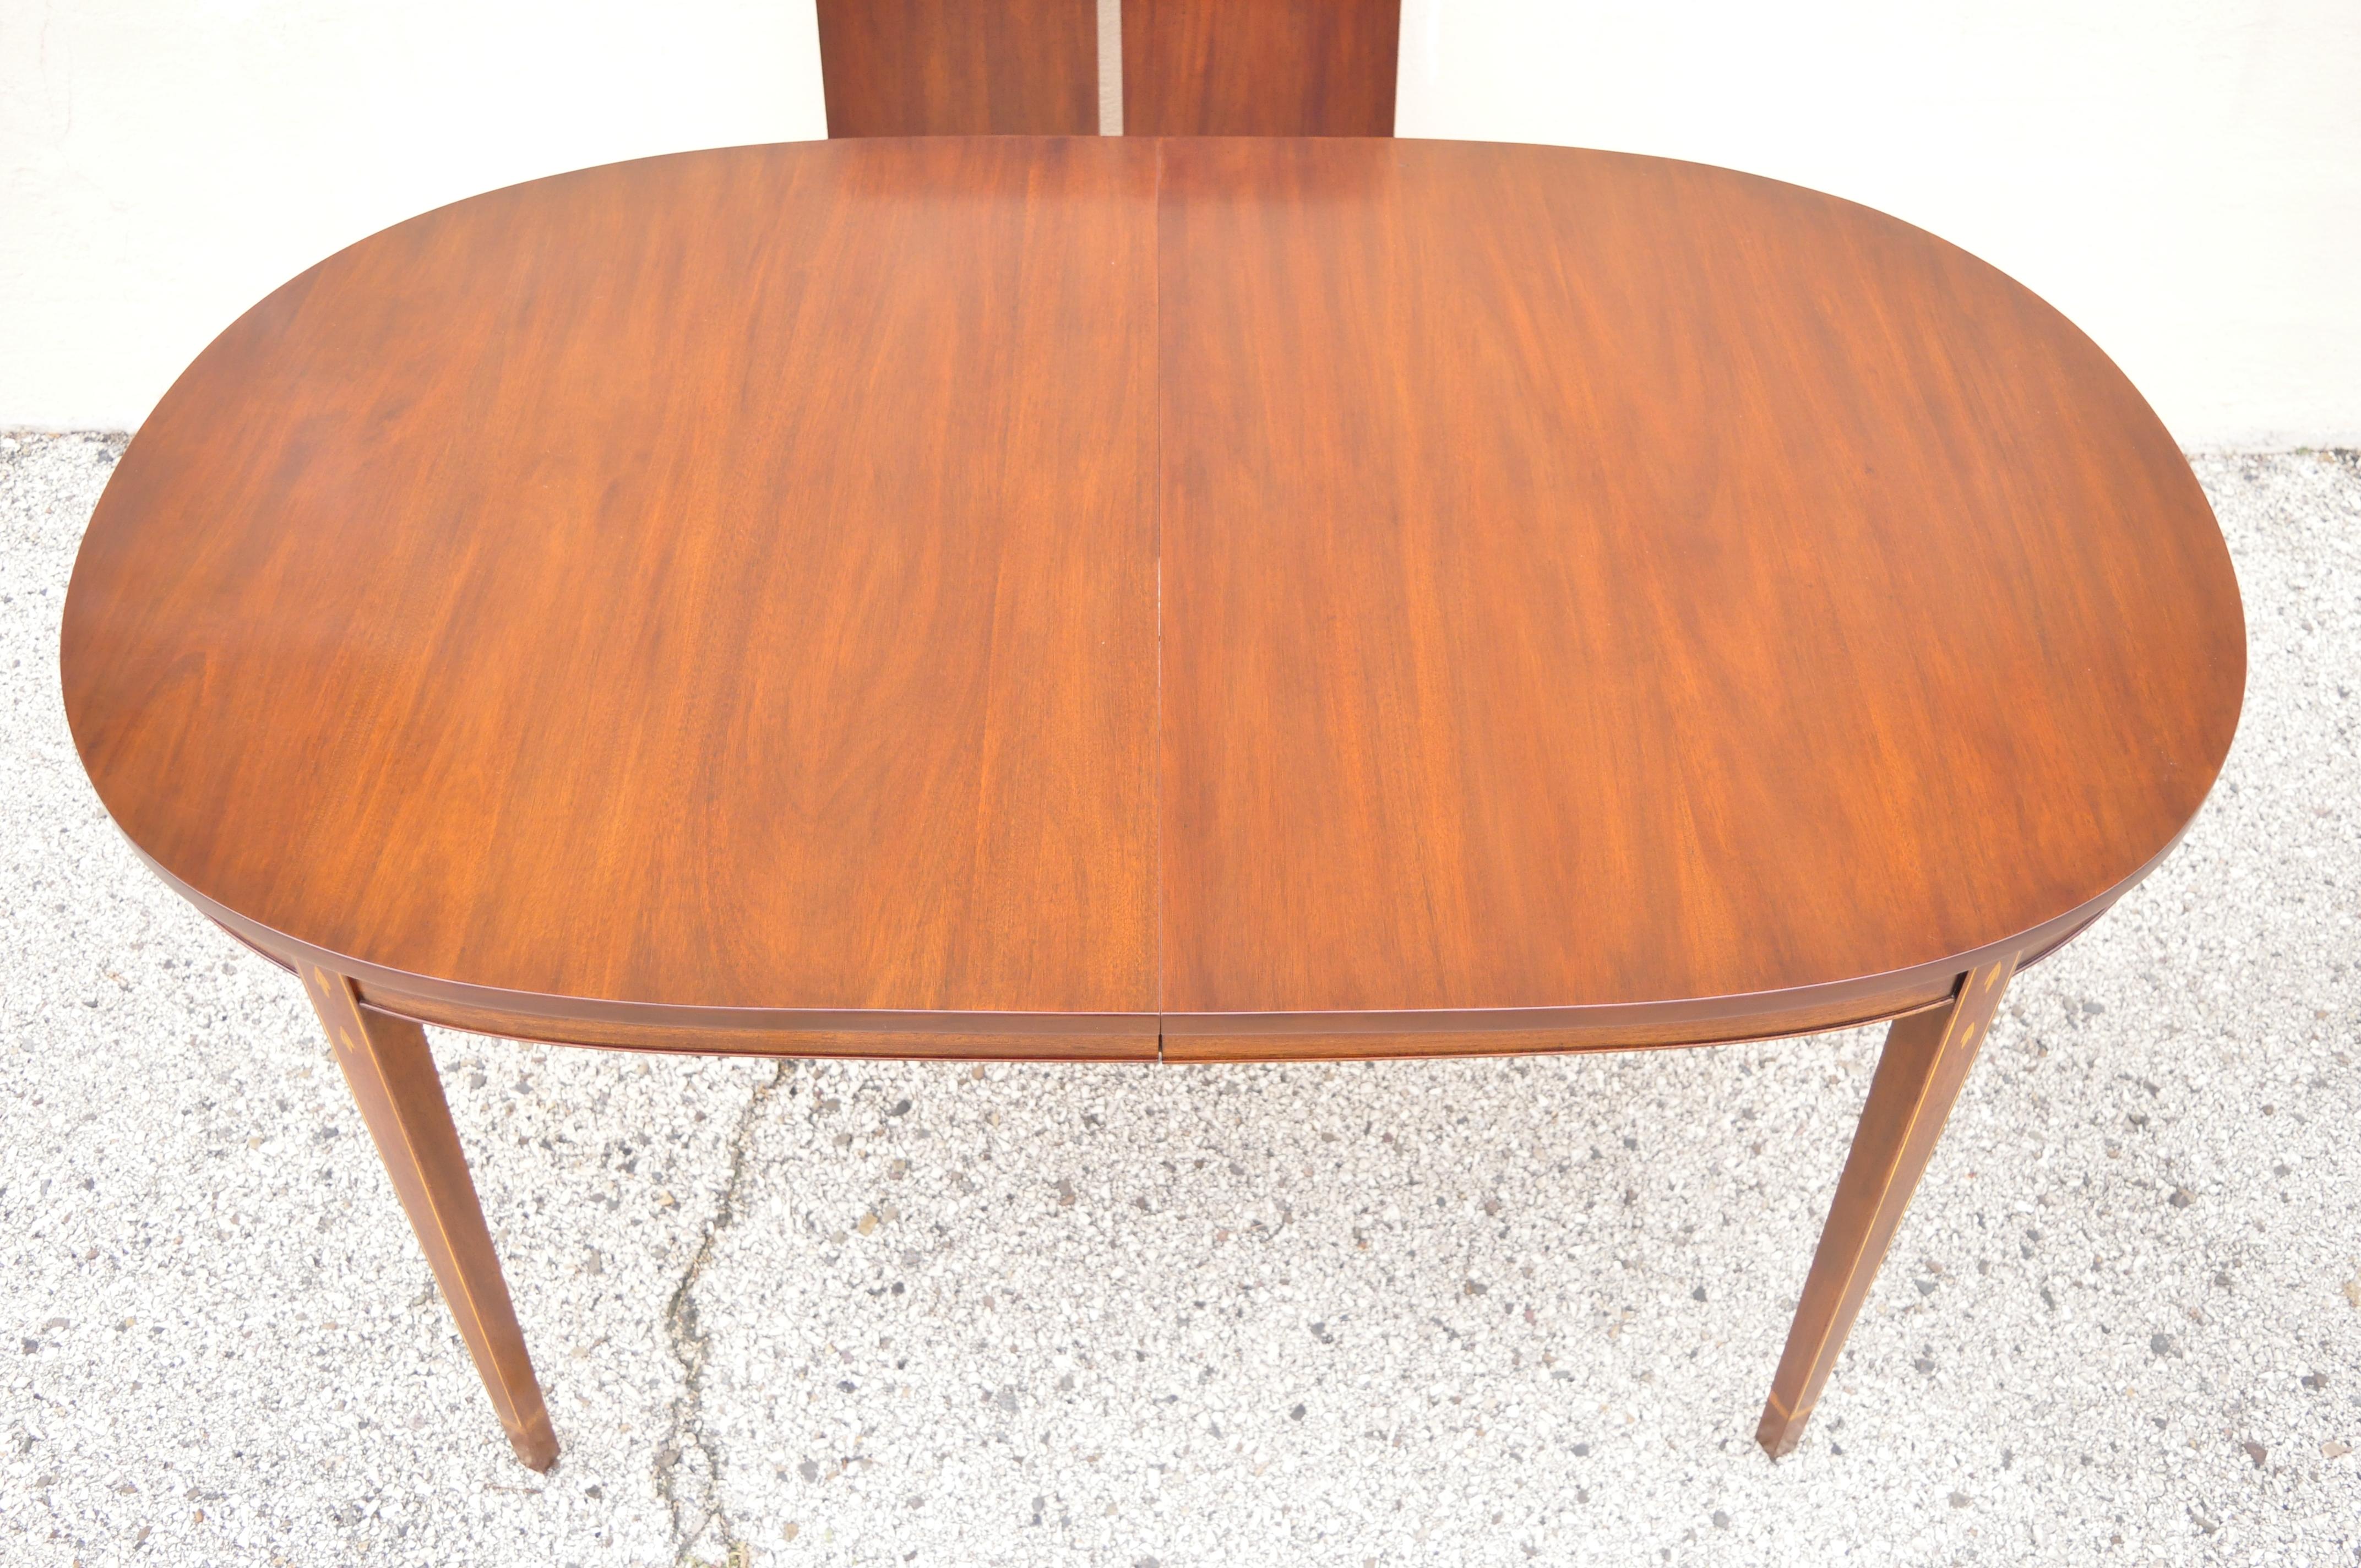 North American Henkel Harris Oval Mahogany Dining Room Table with Inlaid Legs and Two Leaves